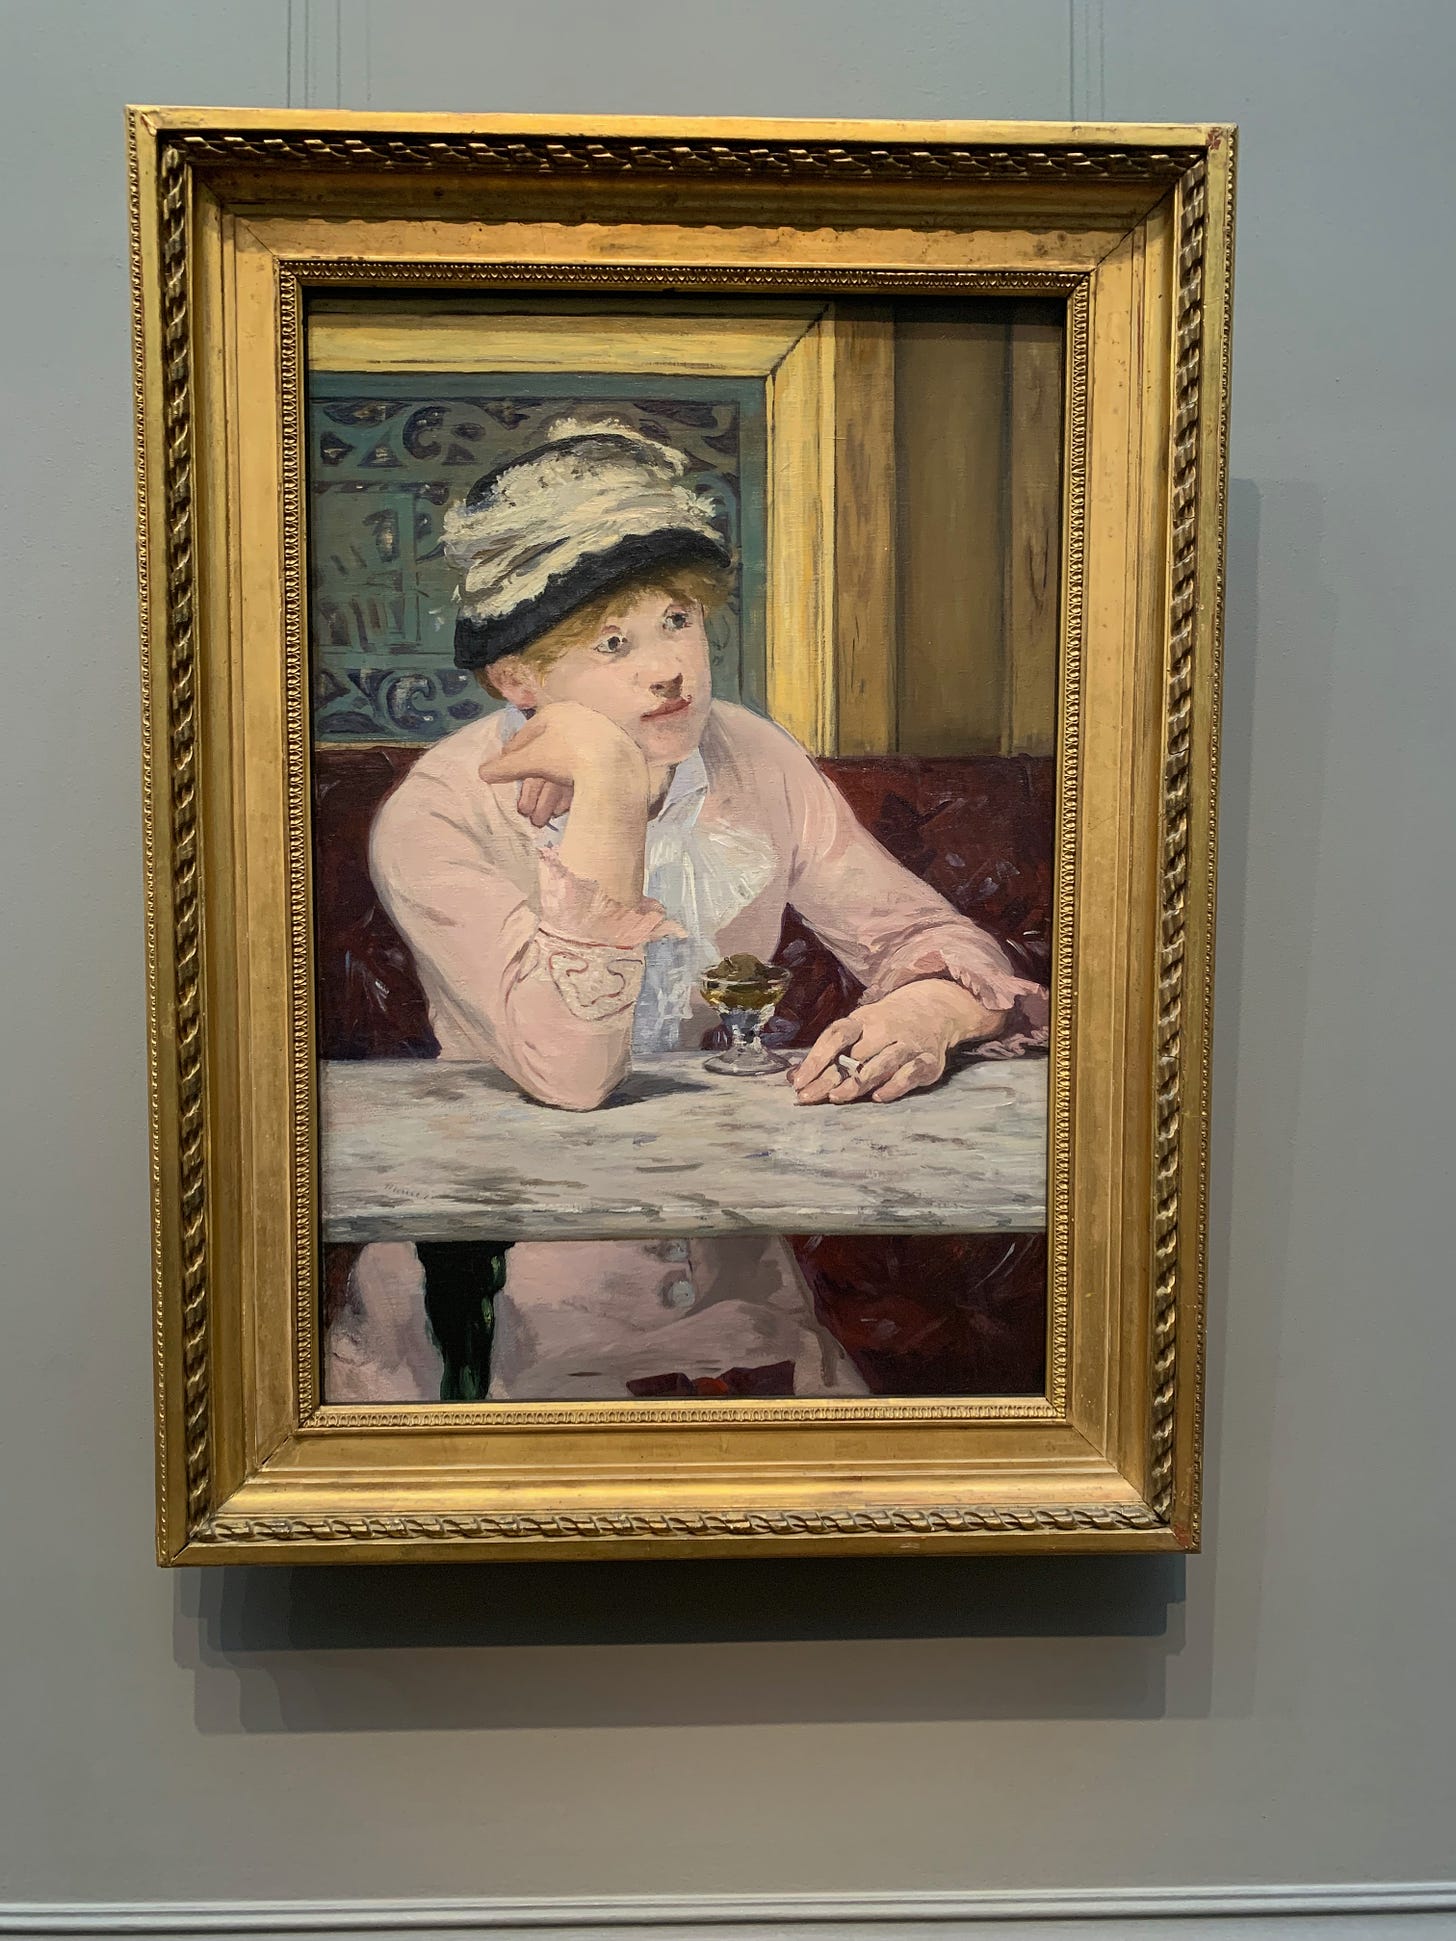 Édouard Manet’s Plum Brandy at the NGA. A sad looking woman with a drink